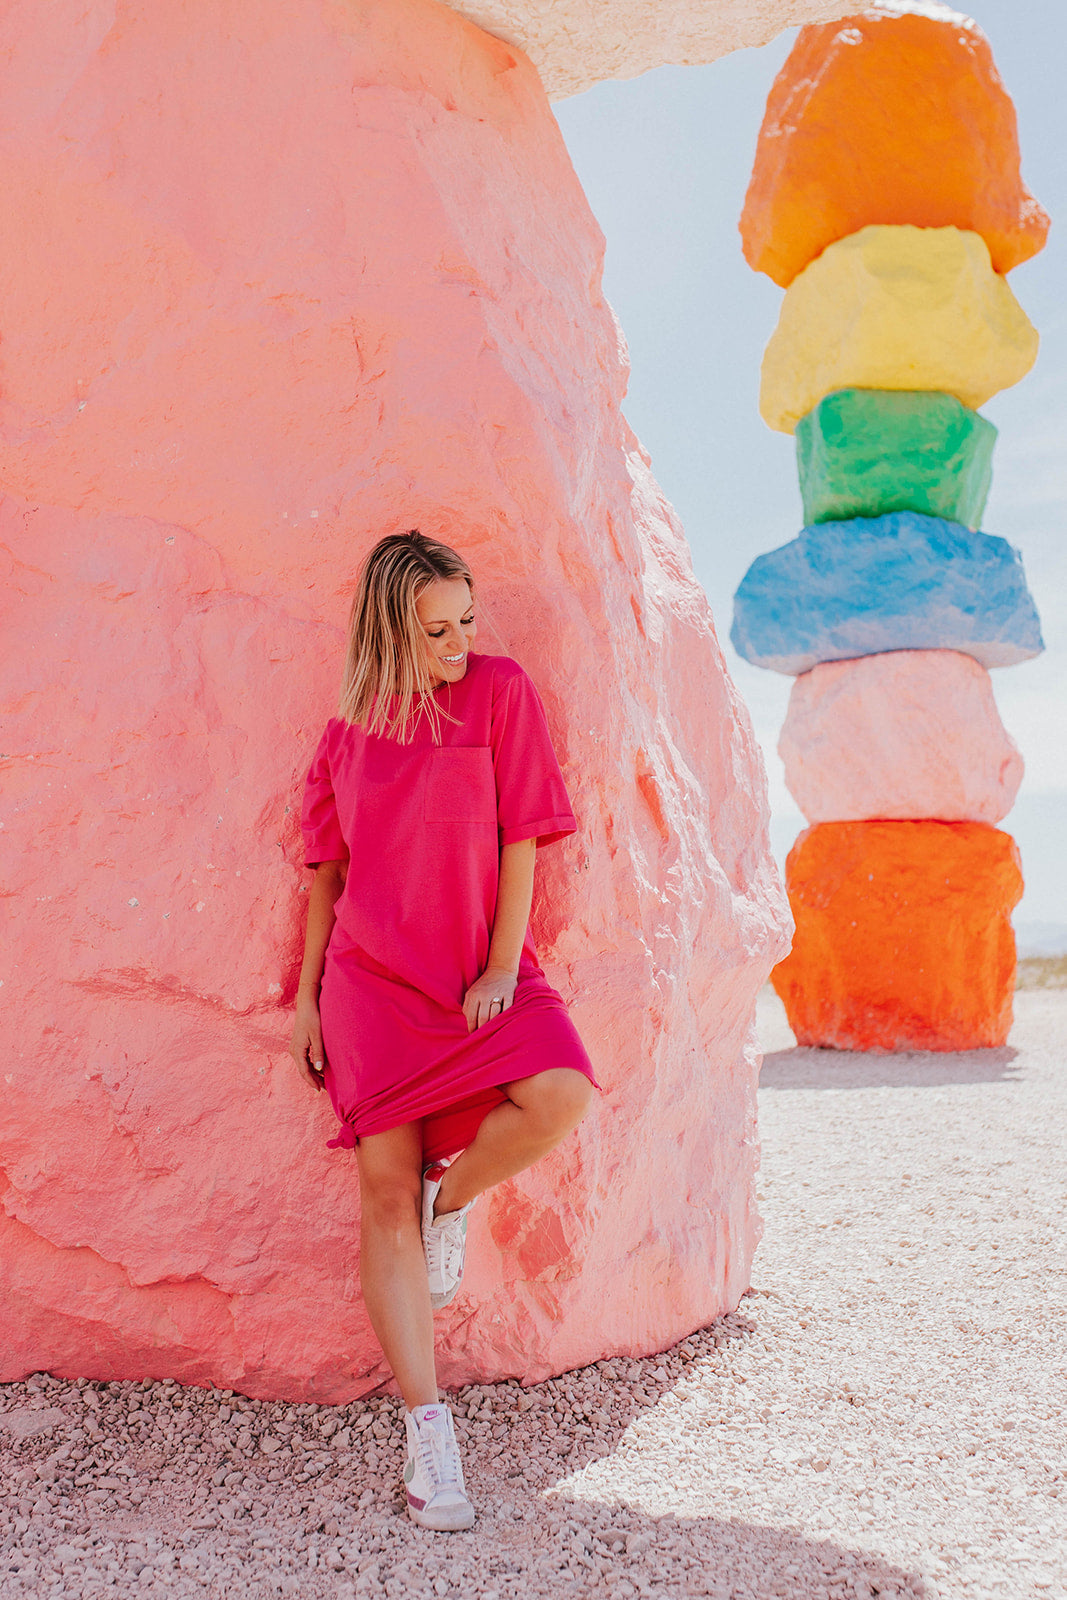 THE EASY DOES IT T-SHIRT DRESS BY PINK DESERT IN FUCHSIA